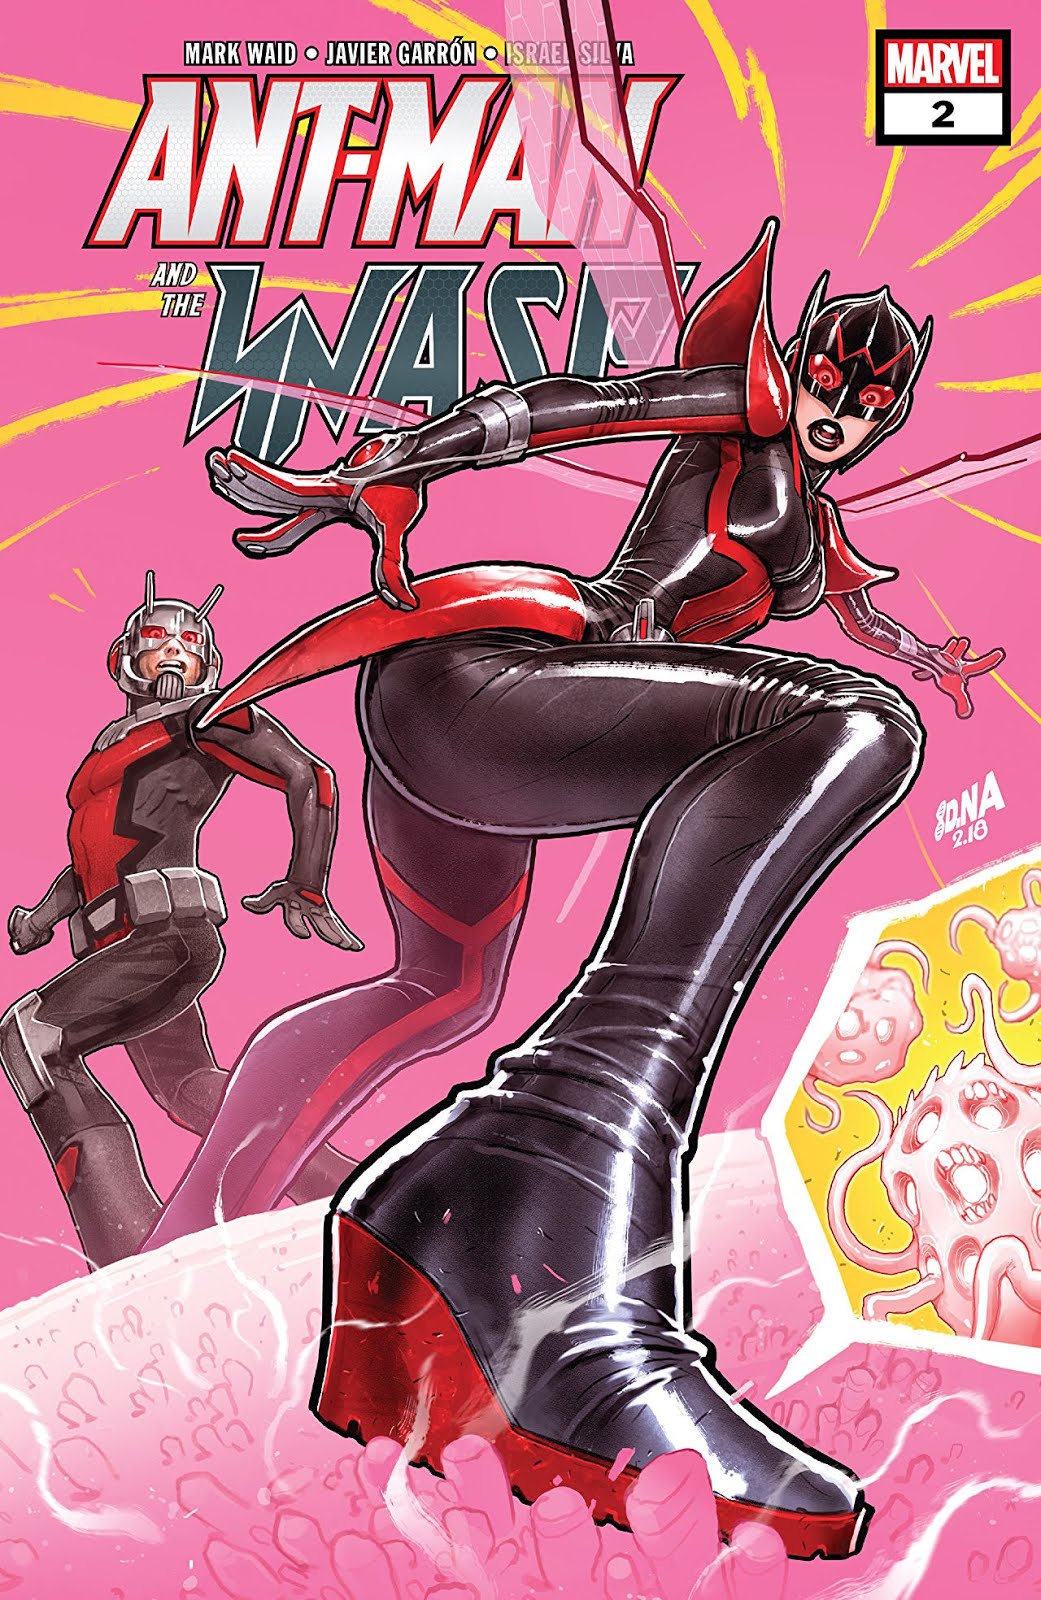 Ant-Man & The Wasp #2